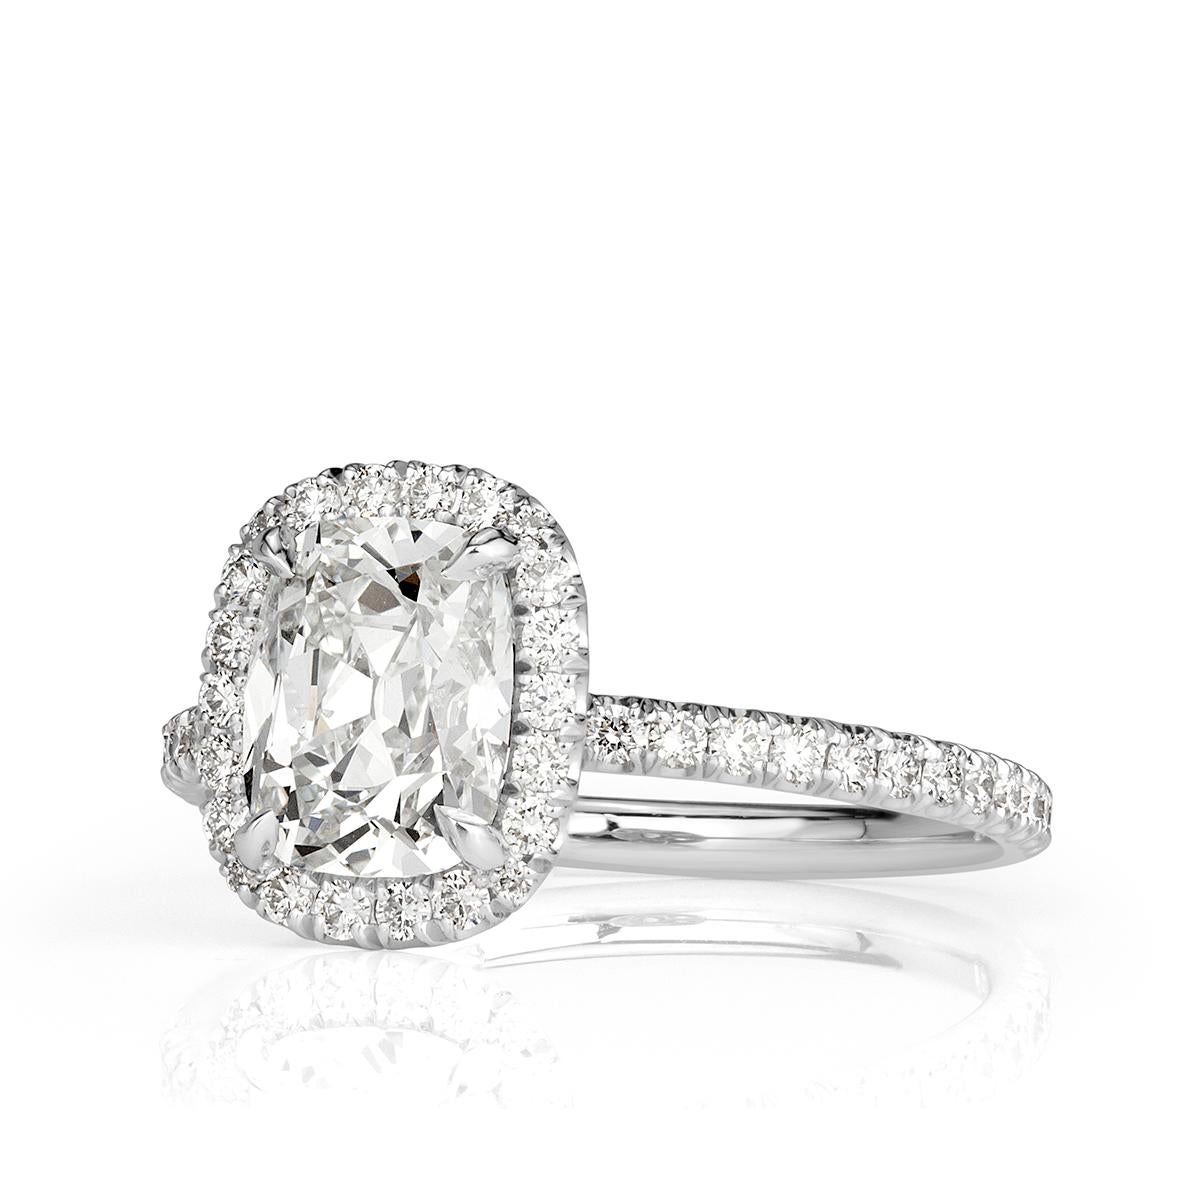 Exquisitely handcrafted in platinum, this ravishing diamond engagement ring showcases a unique 1.59ct old Mine cut center diamond, GIA certified at G-SI1. It measures 7.77 x 6.21 mm, an extremely rare proportion and cut. It is complimented by a